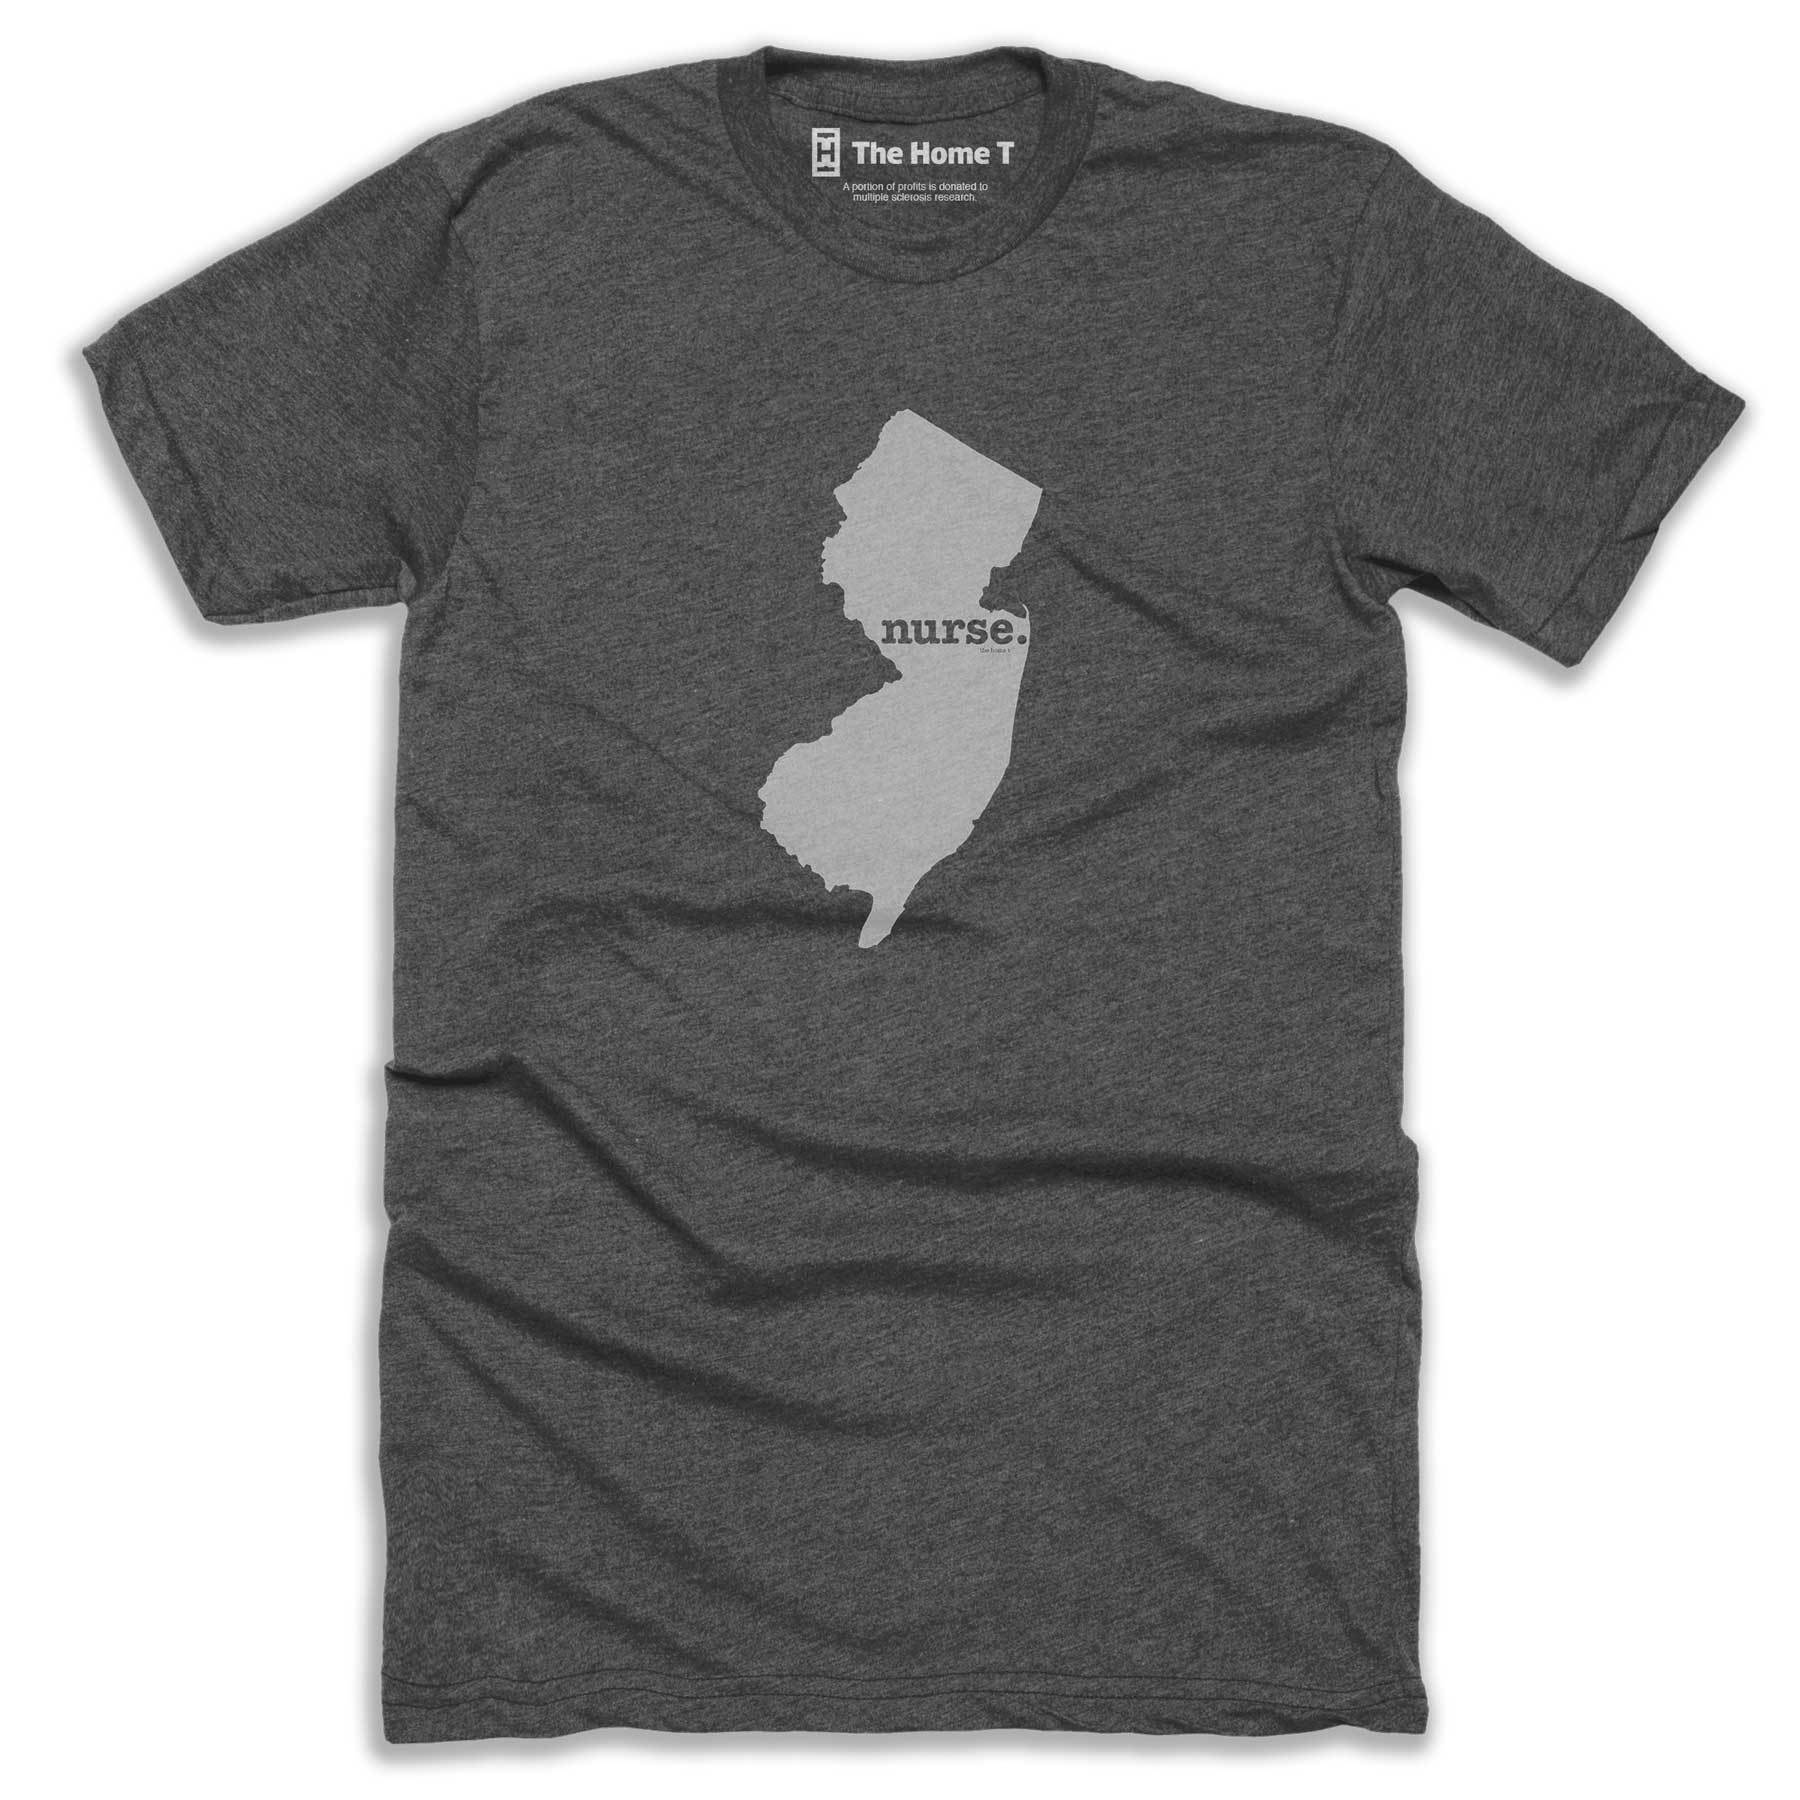 New Jersey Nurse Home T-Shirt - The Home T.